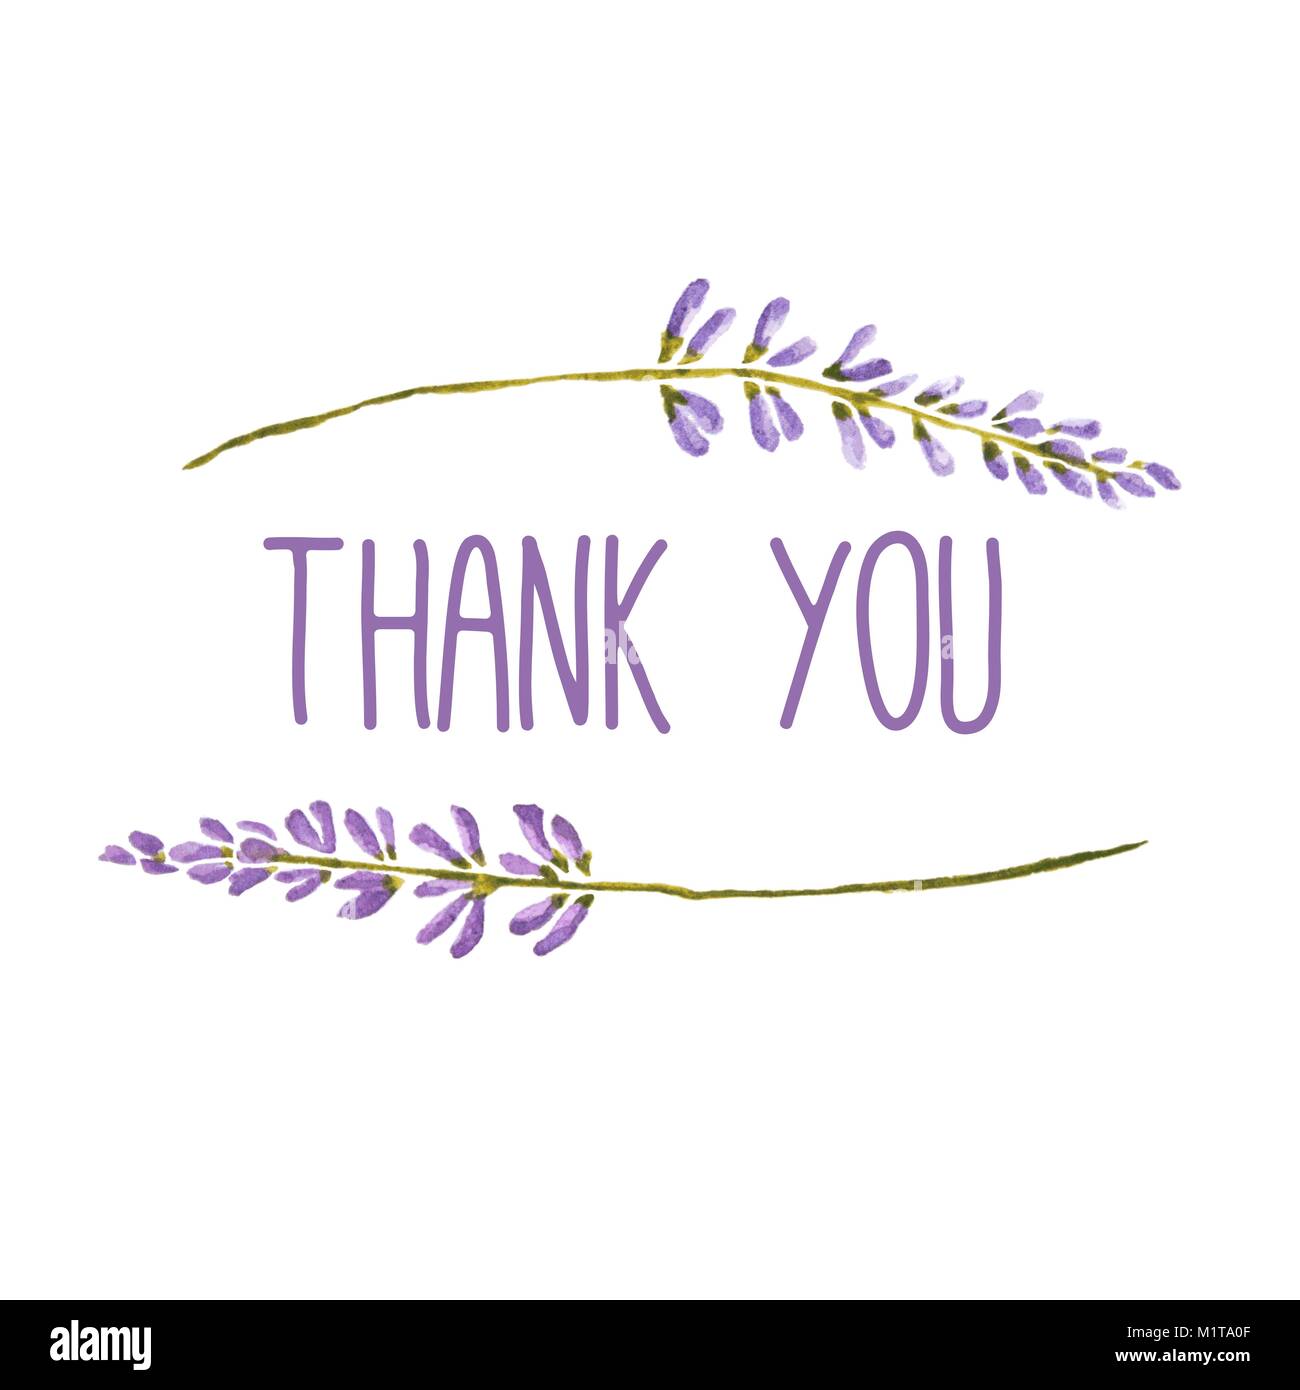 Vector watercolor greeting card with words Thank you framed by flowers of lavender. Stock Vector